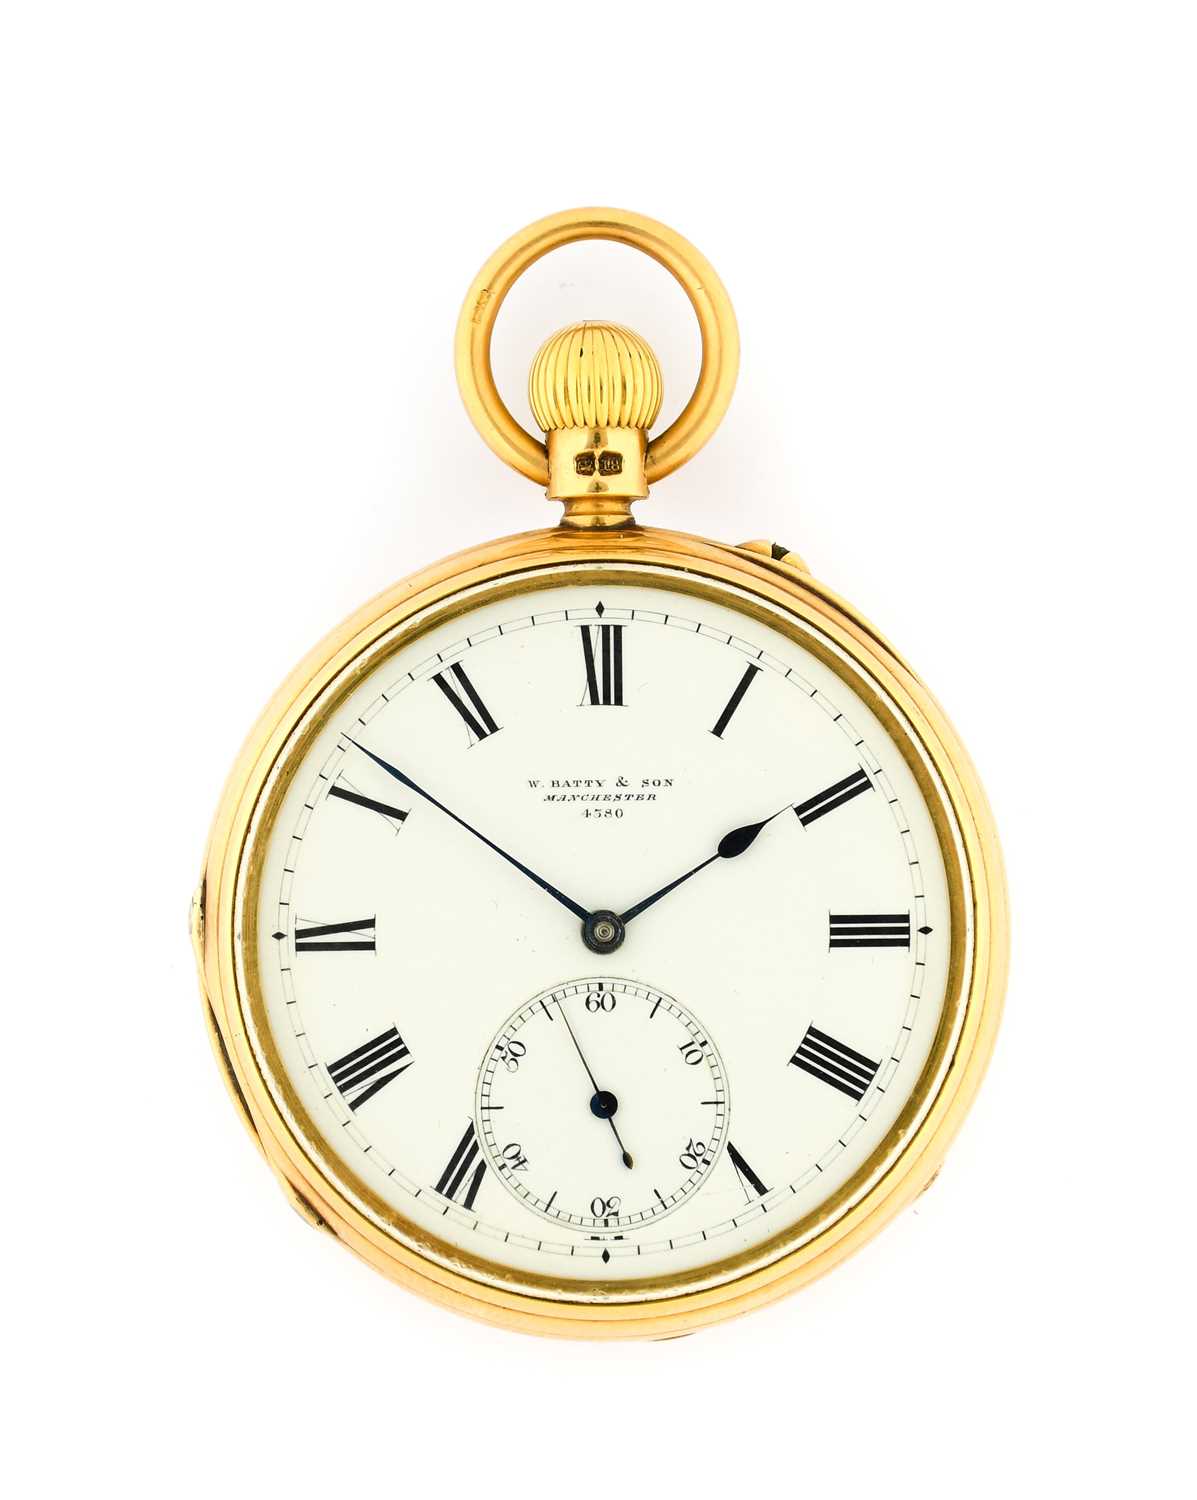 W.Batty & Son: An 18 Carat Gold Open Faced Pocket Watch, retailed by W.Batty & Son, Manchester,